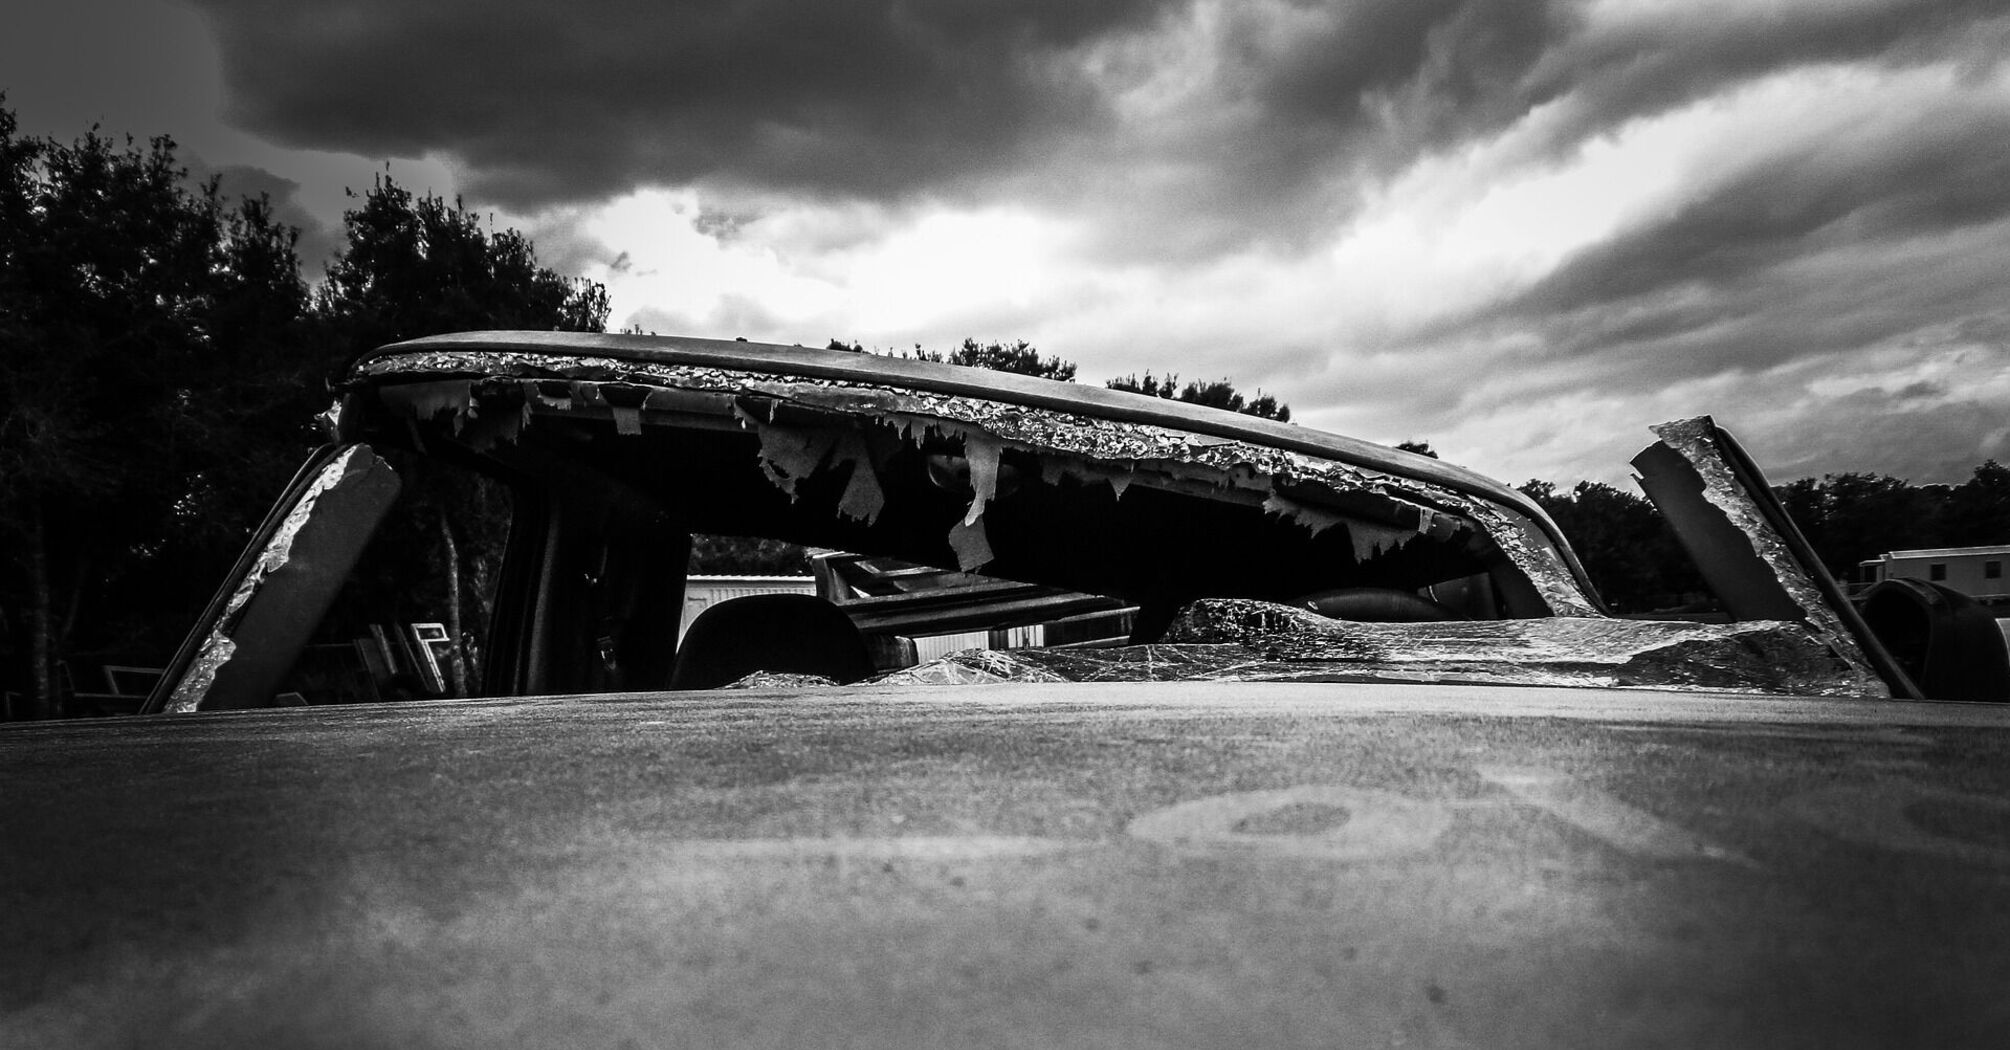 Car with shattered windows, under an overcast sky